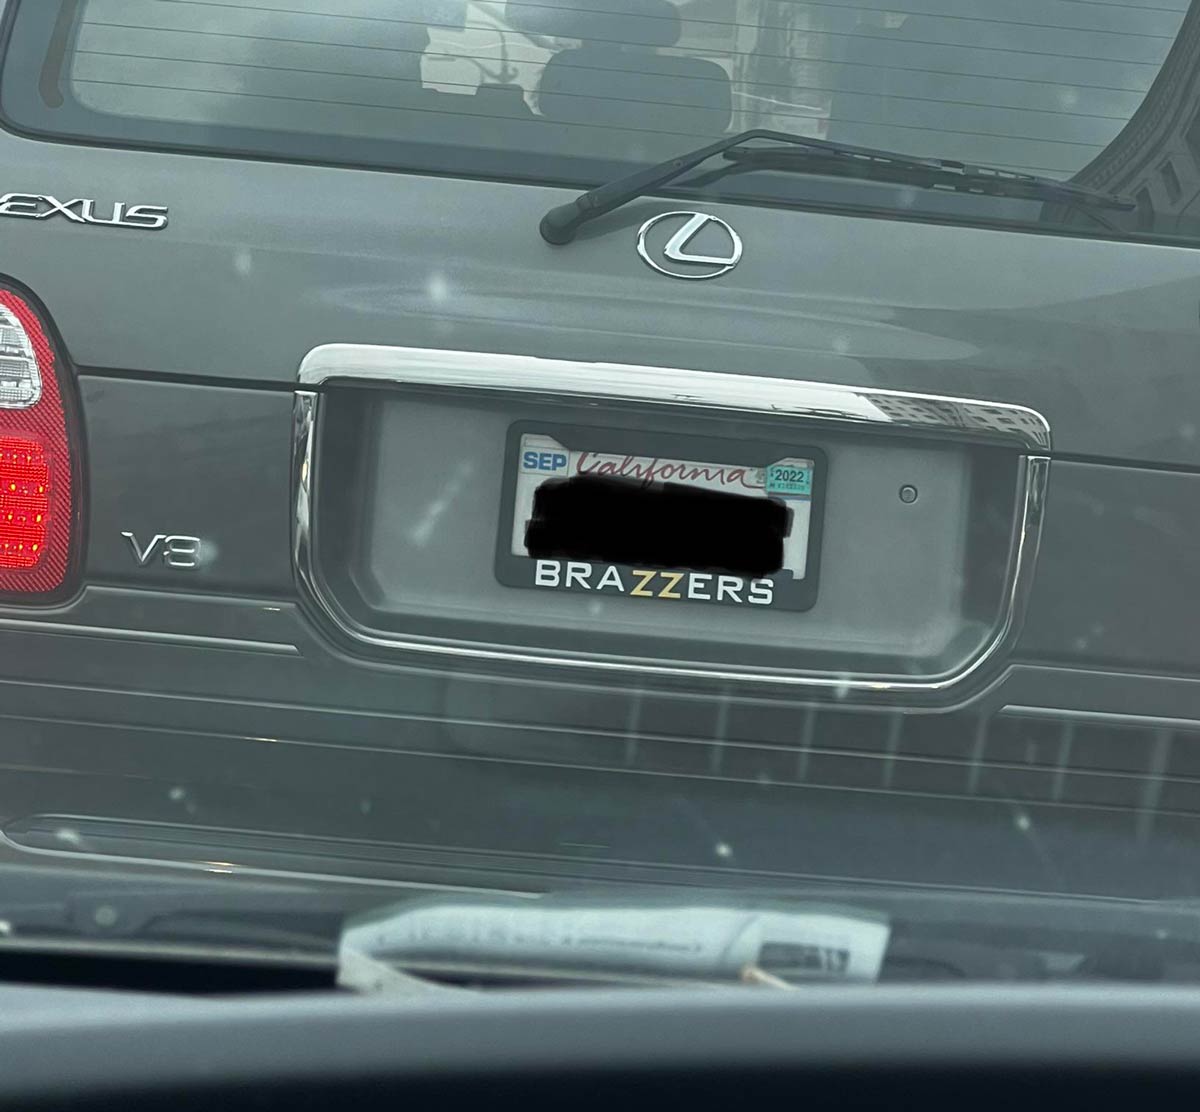 This license plate cover I saw today